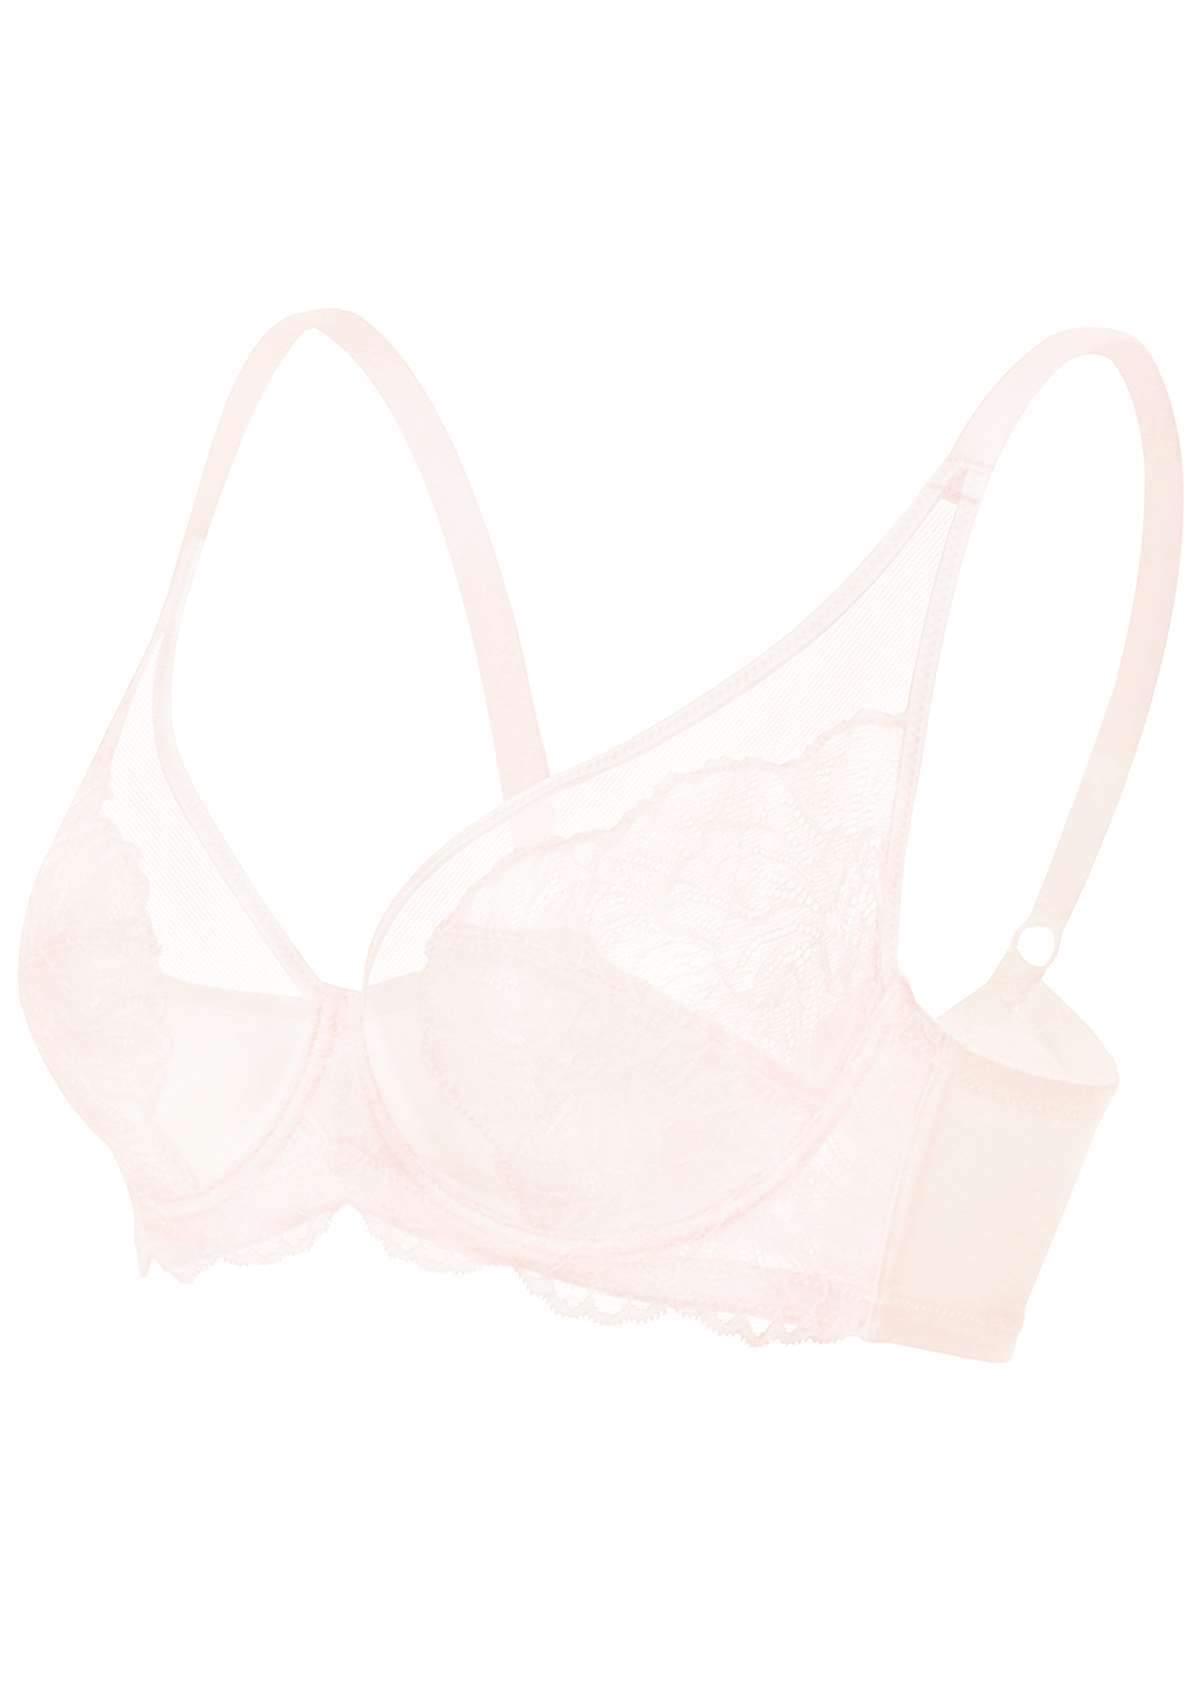 HSIA Blossom Sheer Lace Bra: Comfortable Underwire Bra For Big Busts - White / 40 / I